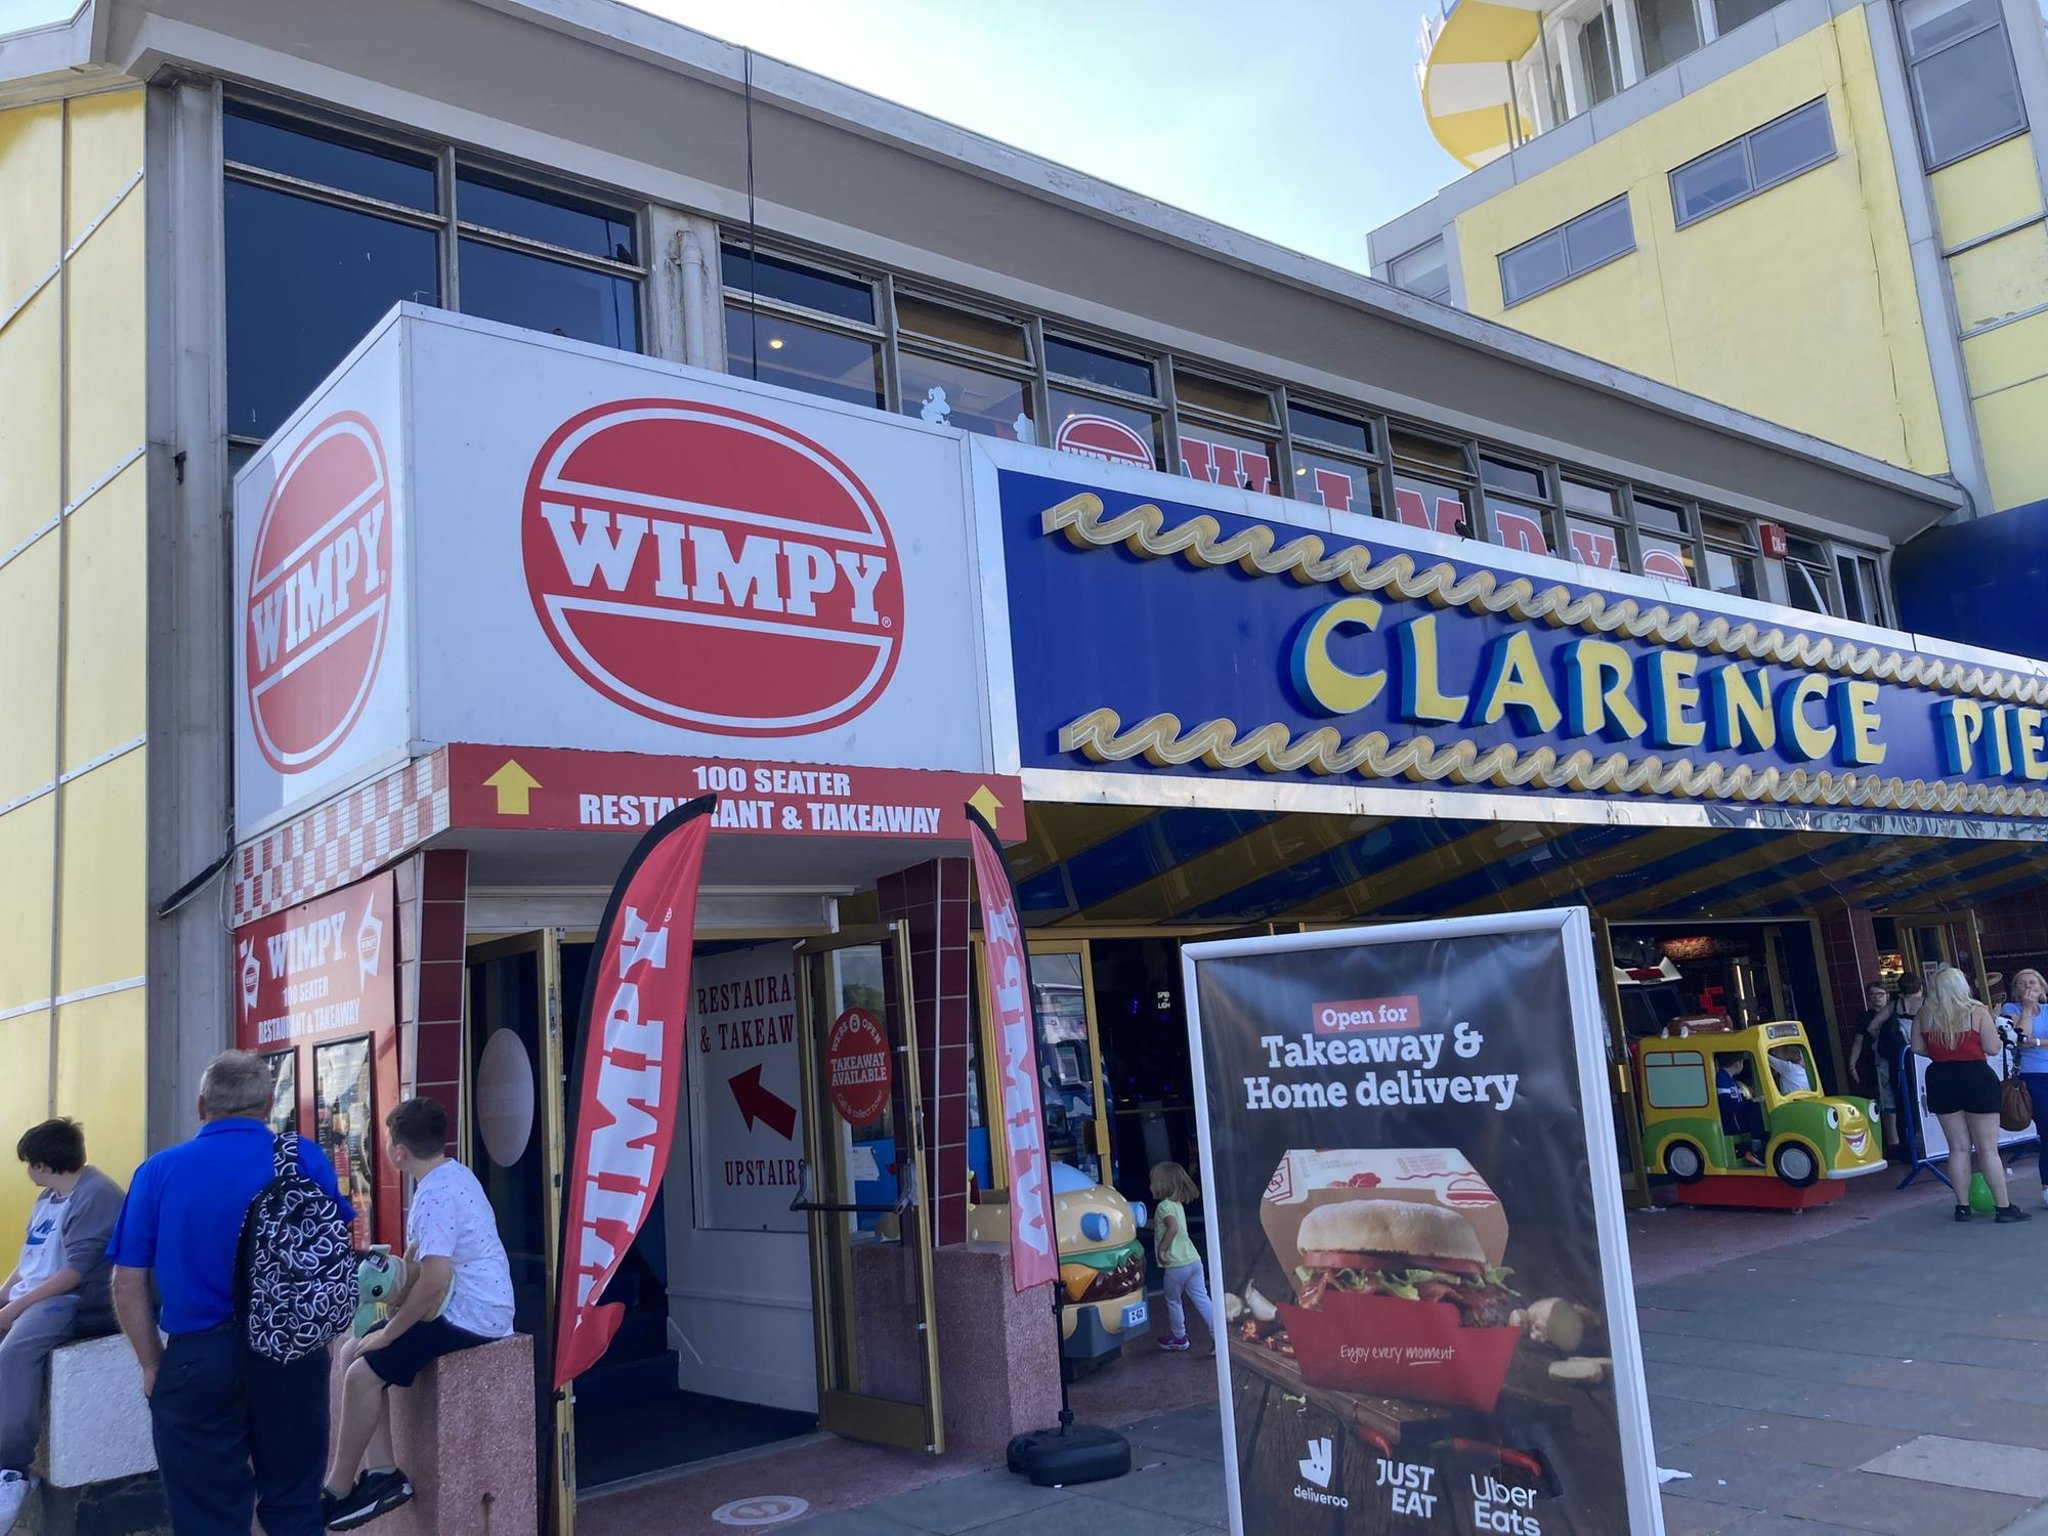 Wimpy At Clarence Pier In Southsea Readers React To The Dish Detective Slating Long Standing Burger Joint The News